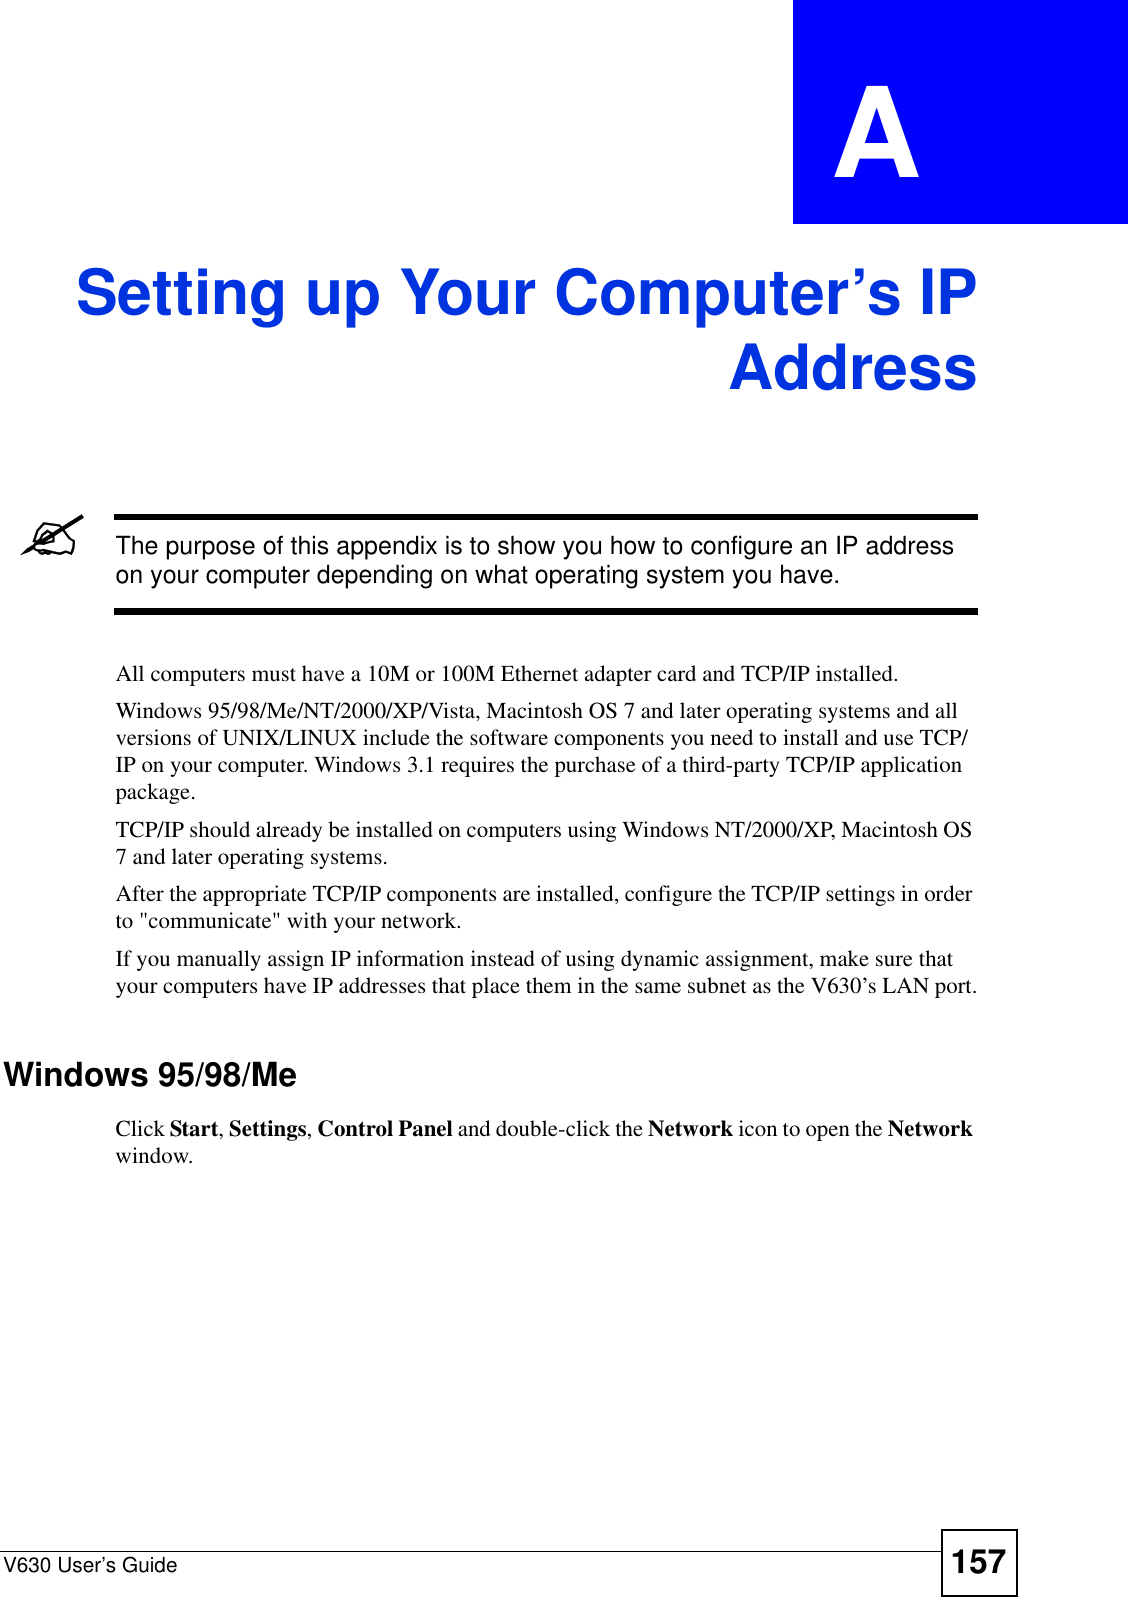 V630 User’s Guide 157APPENDIX  A Setting up Your Computer’s IPAddress&quot;The purpose of this appendix is to show you how to configure an IP address on your computer depending on what operating system you have. All computers must have a 10M or 100M Ethernet adapter card and TCP/IP installed. Windows 95/98/Me/NT/2000/XP/Vista, Macintosh OS 7 and later operating systems and all versions of UNIX/LINUX include the software components you need to install and use TCP/IP on your computer. Windows 3.1 requires the purchase of a third-party TCP/IP application package.TCP/IP should already be installed on computers using Windows NT/2000/XP, Macintosh OS 7 and later operating systems.After the appropriate TCP/IP components are installed, configure the TCP/IP settings in order to &quot;communicate&quot; with your network. If you manually assign IP information instead of using dynamic assignment, make sure that your computers have IP addresses that place them in the same subnet as the V630’s LAN port.Windows 95/98/MeClick Start, Settings, Control Panel and double-click the Network icon to open the Network window.